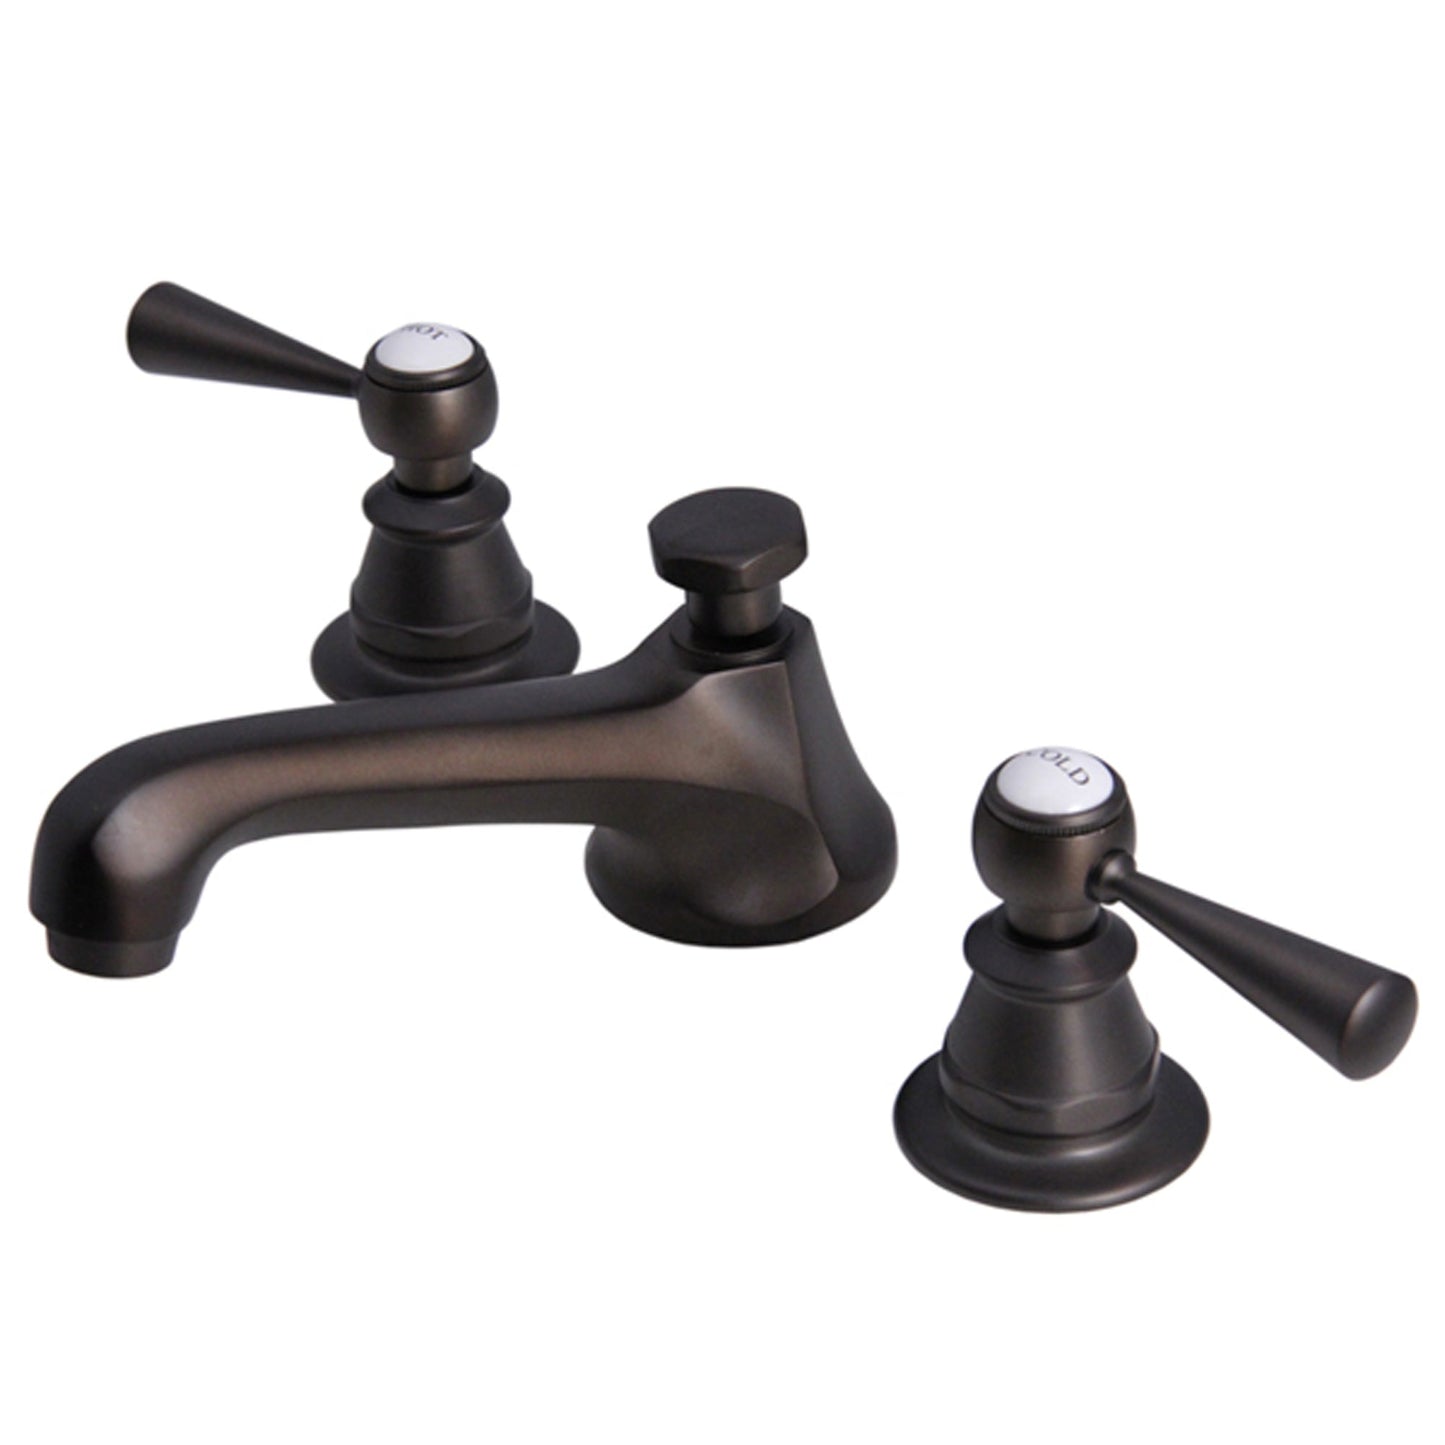 Water Creation American 20th Century Classic Widespread Lavatory F2-0009 8" Brown Solid Brass Faucet With Pop-Up Drain And Torch Lever Handles, Hot And Cold Labels Included